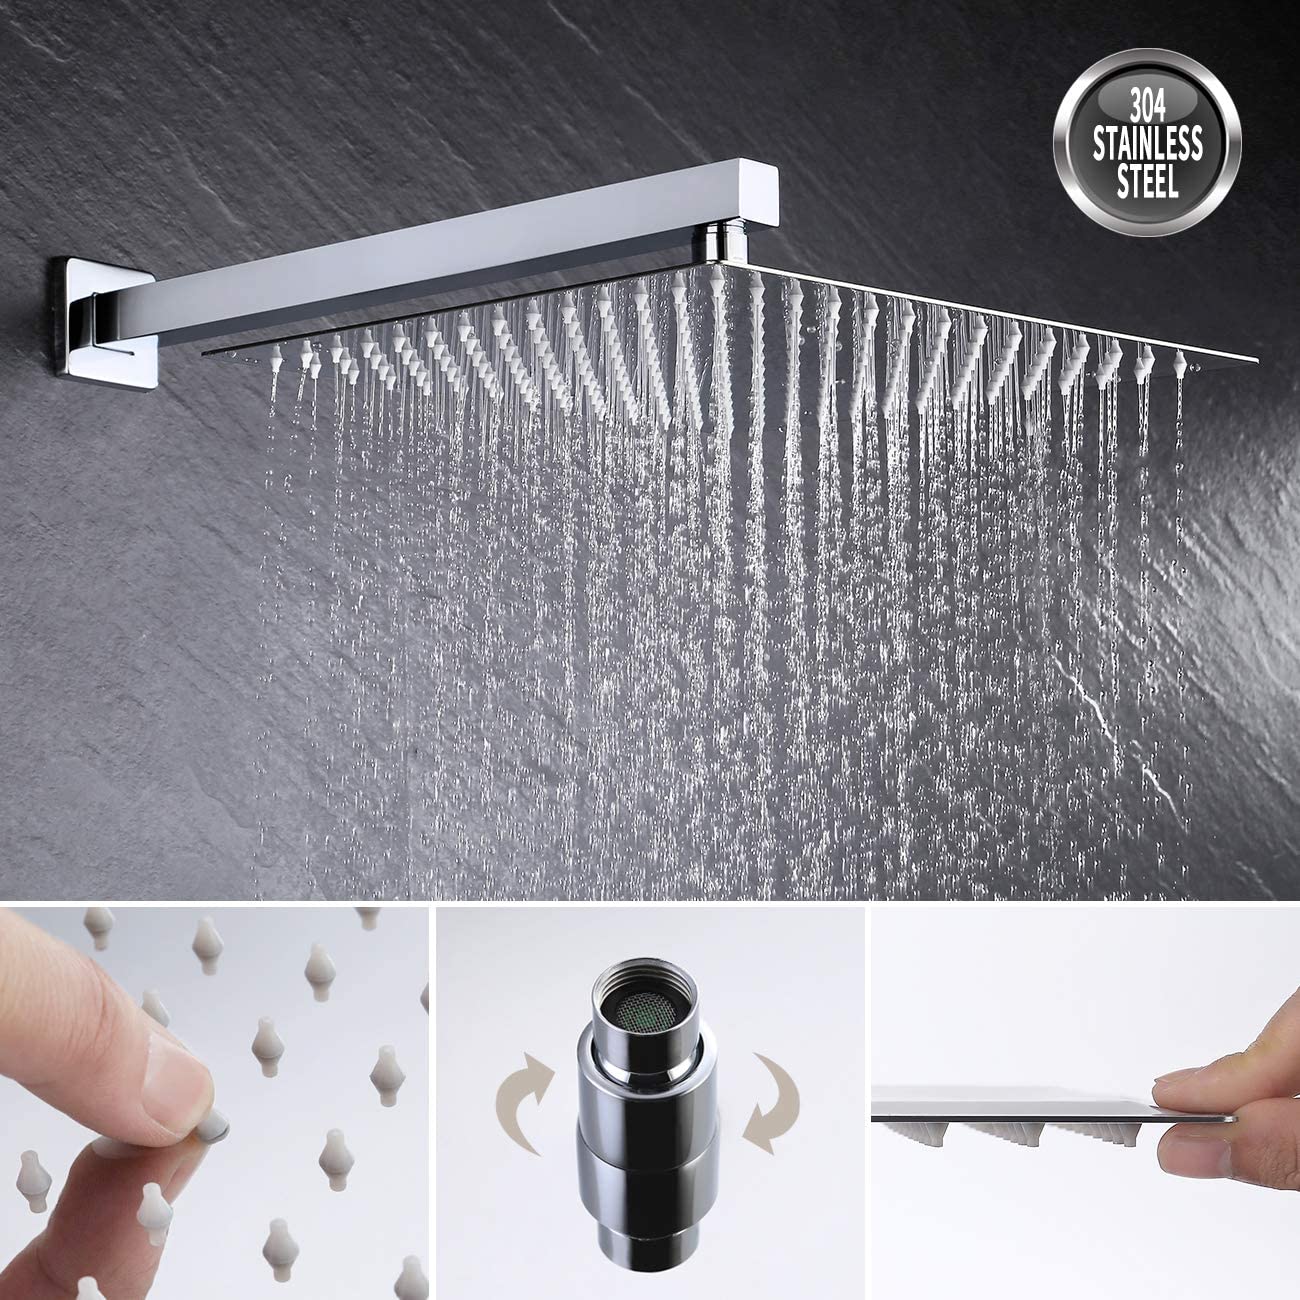 Wall-mounted Rainfall Shower Head System Combo Set